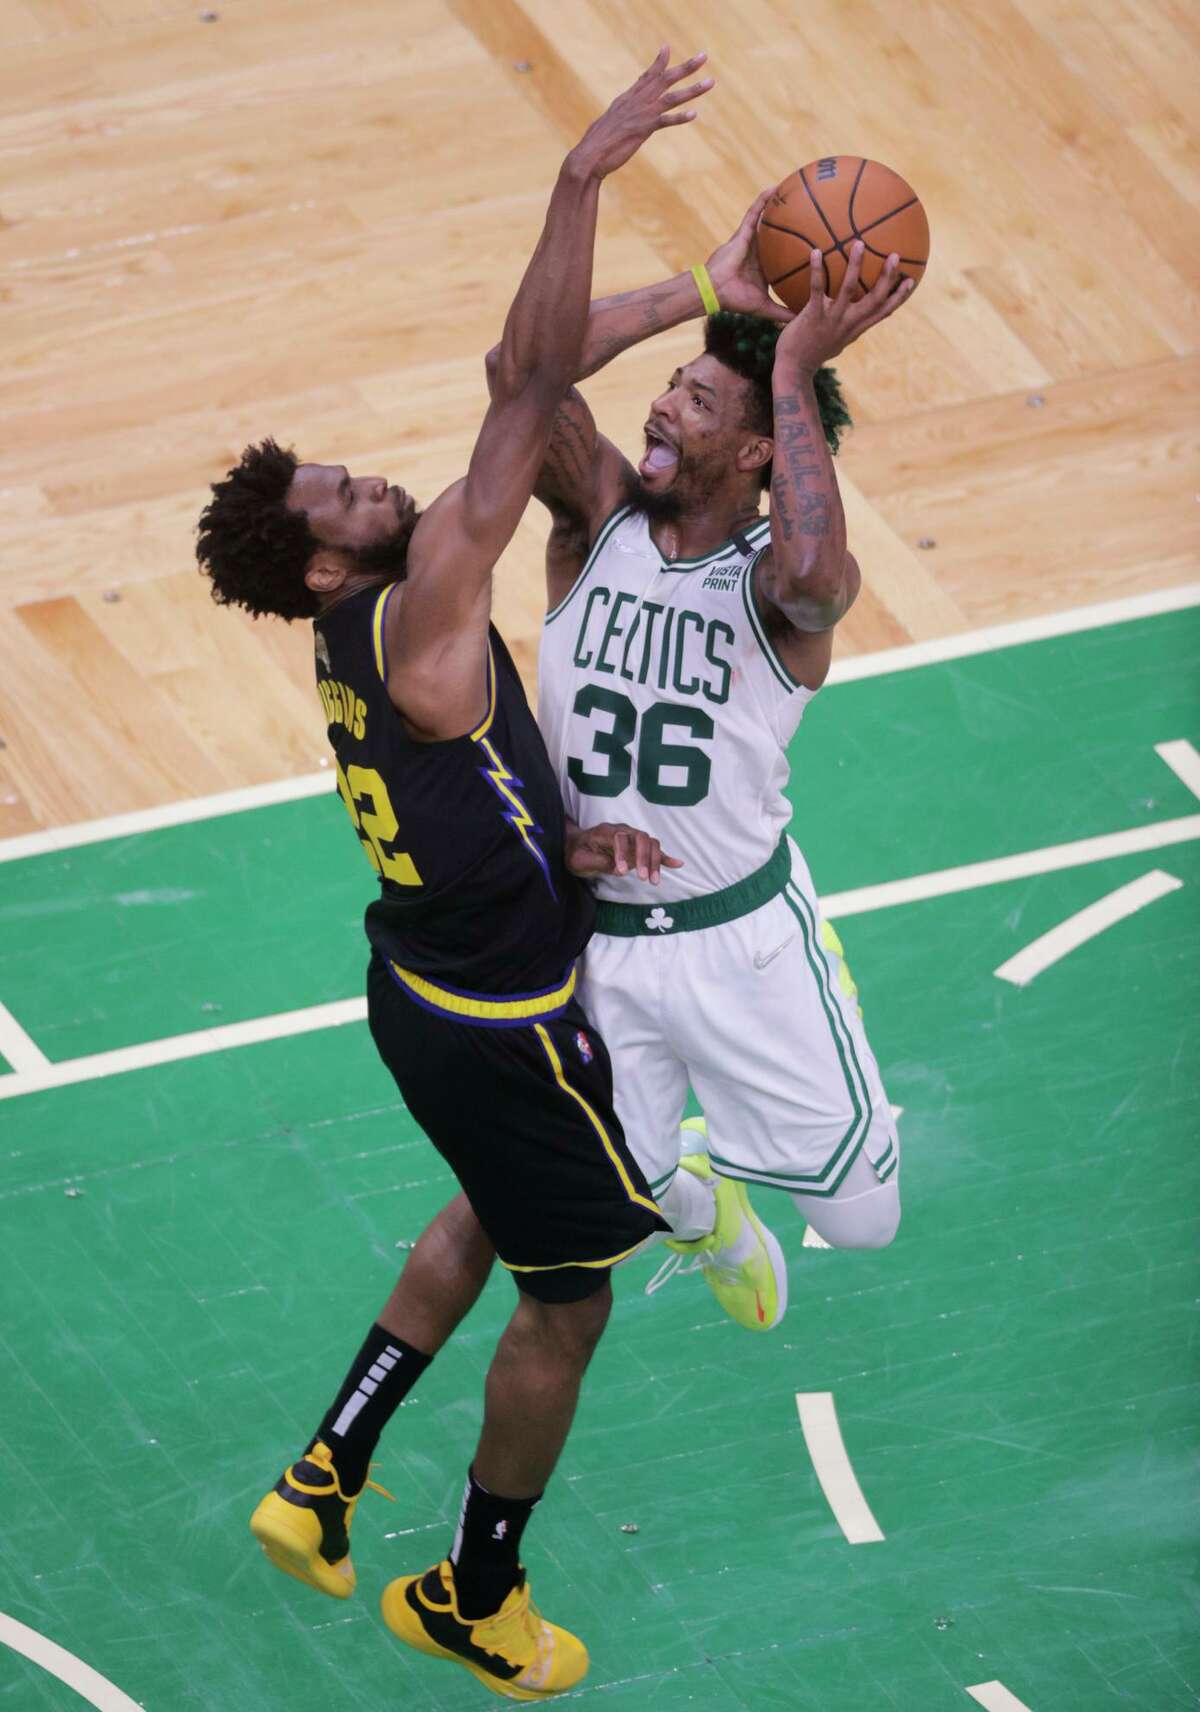 Boston Celtics' Marcus Smart, 36, goes up against Golden State Warriors' Andrew Wiggins, 22, during the third quarter of the NBA Finals at TD Garden in Boston, Mass., on Wednesday, June 8, 2022.